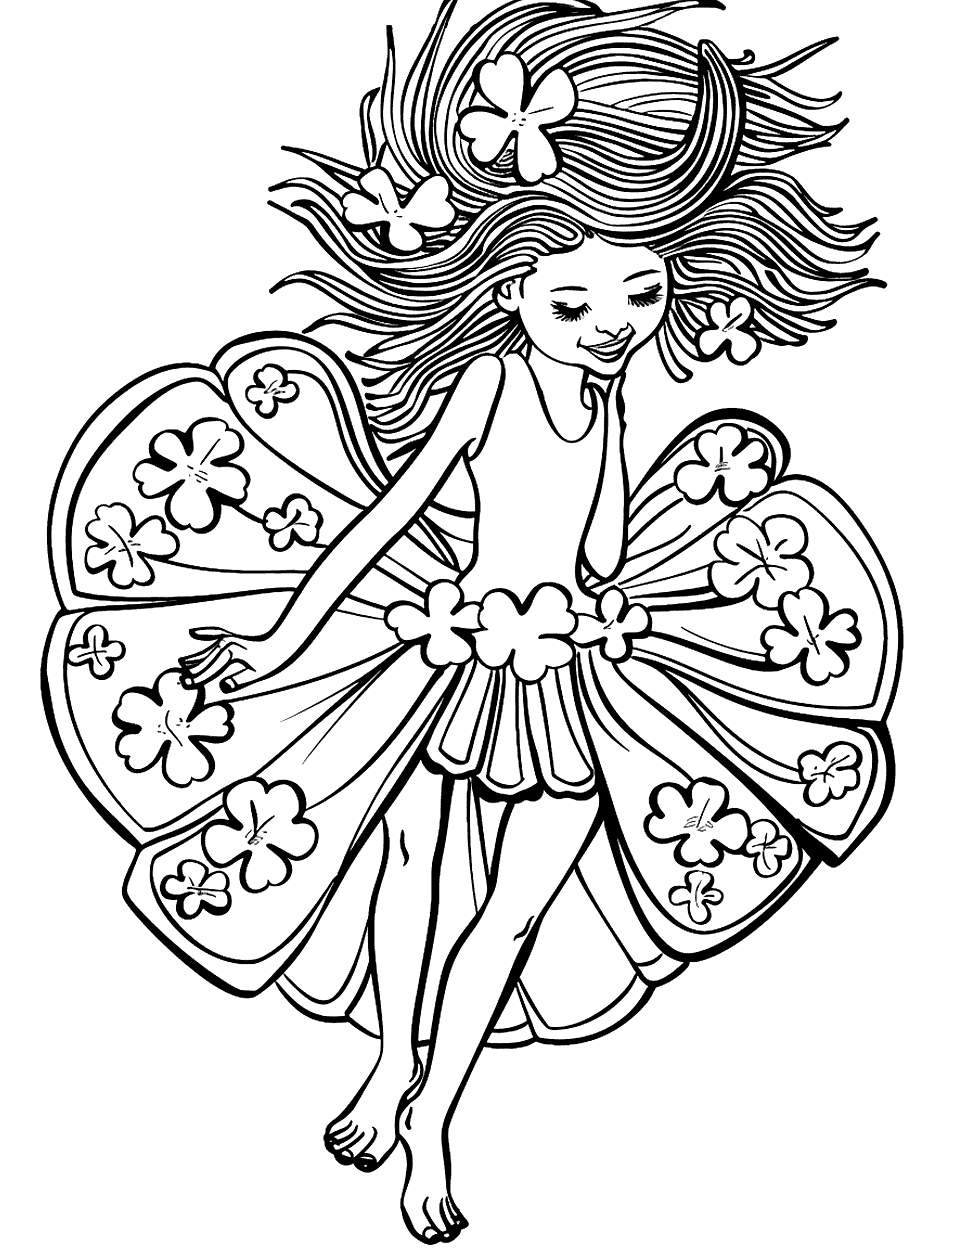 Irish Dancer with Shamrock Dress Coloring Page - An Irish dancer mid-performance, wearing a dress decorated with shamrock patterns.